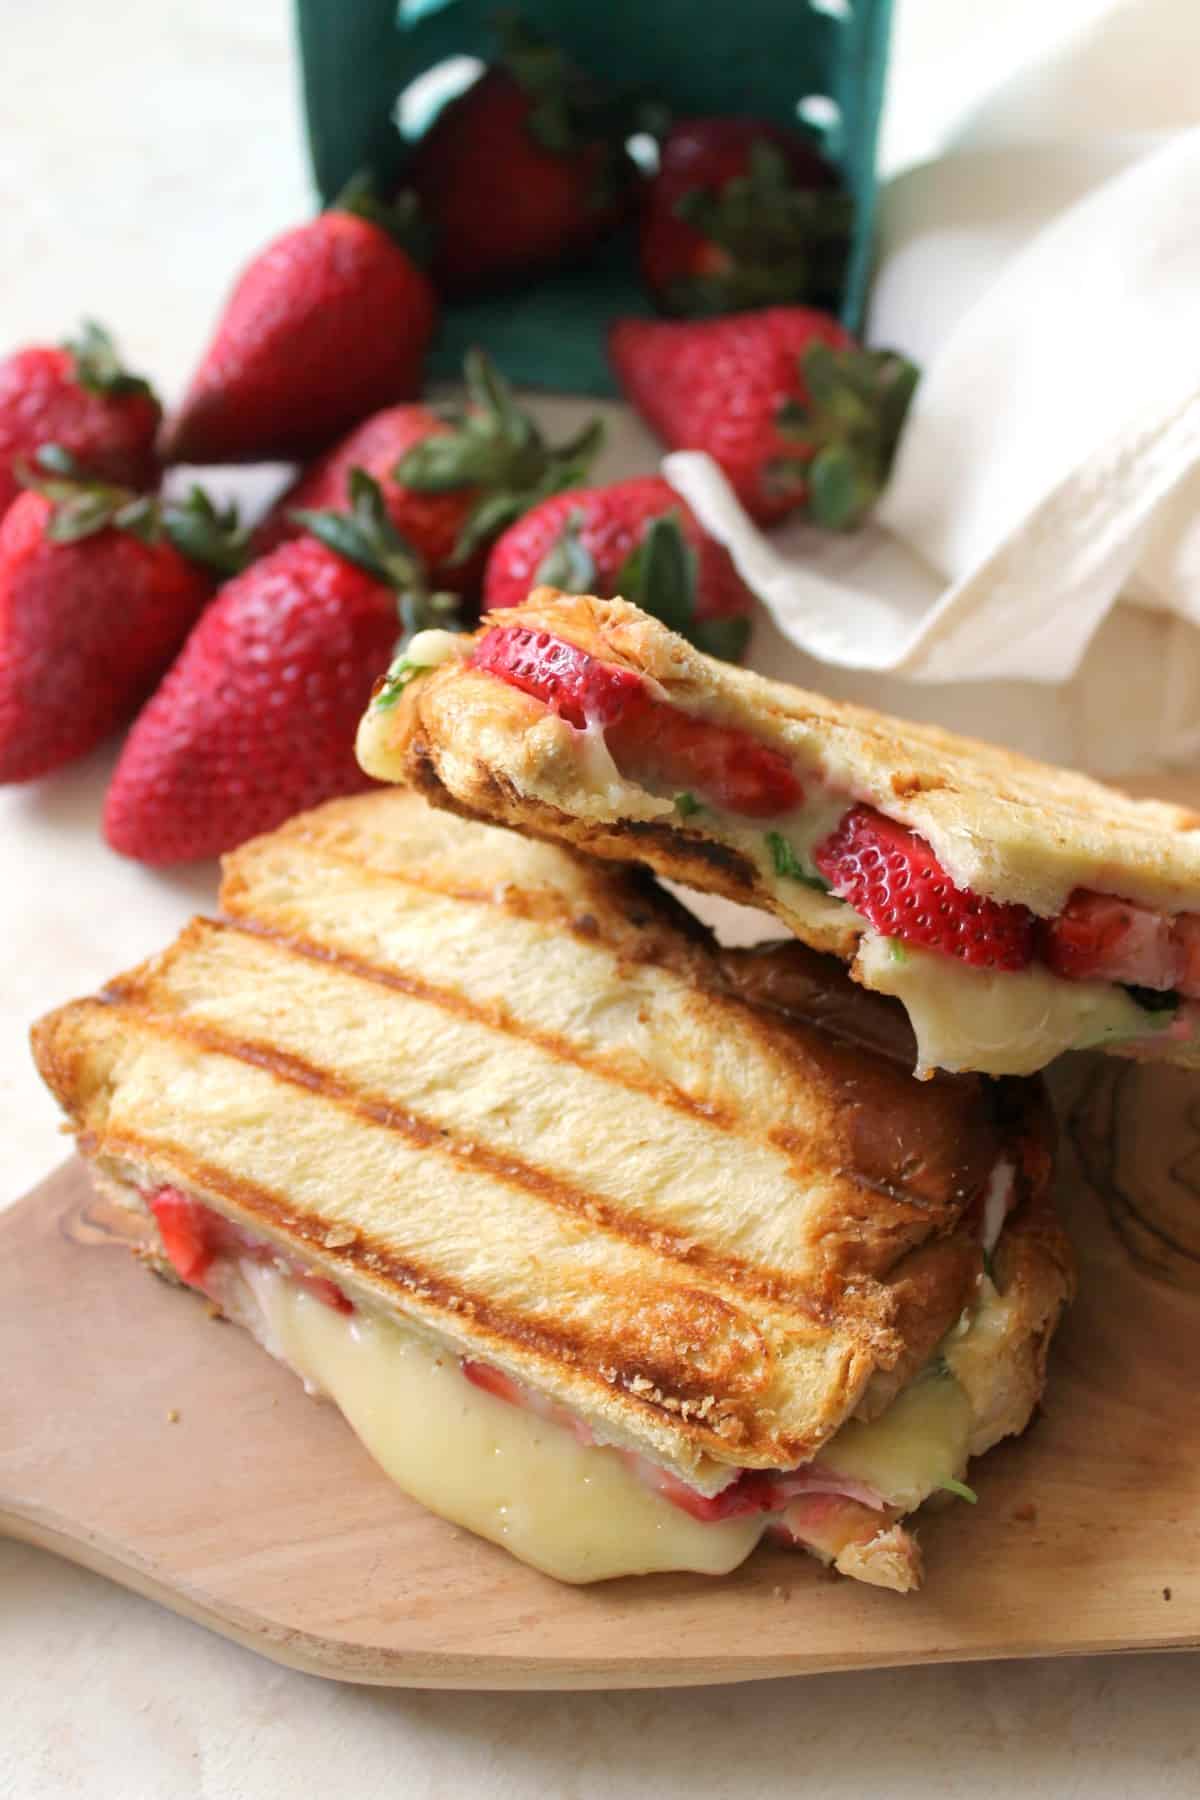 Strawberry, Brie & Arugula Paninis are a simple but delicious way to enjoy ripe, juicy strawberries! A classic comfort food with a springtime twist!